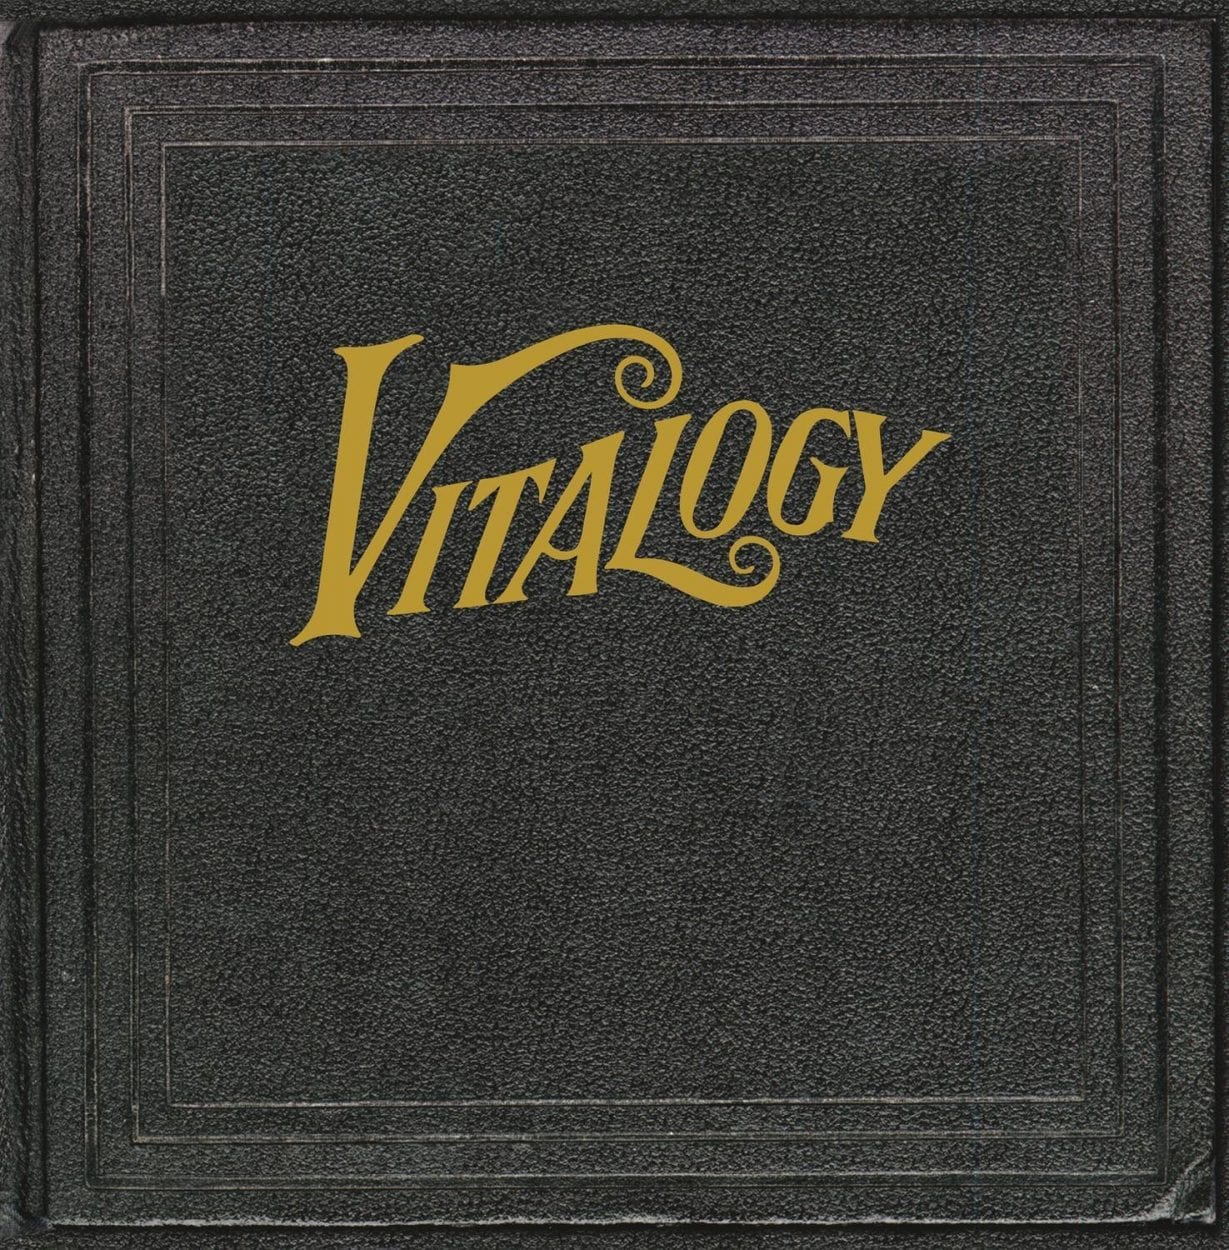 A black cardboard sleeve with “Vitalogy” centered in styled gold font.